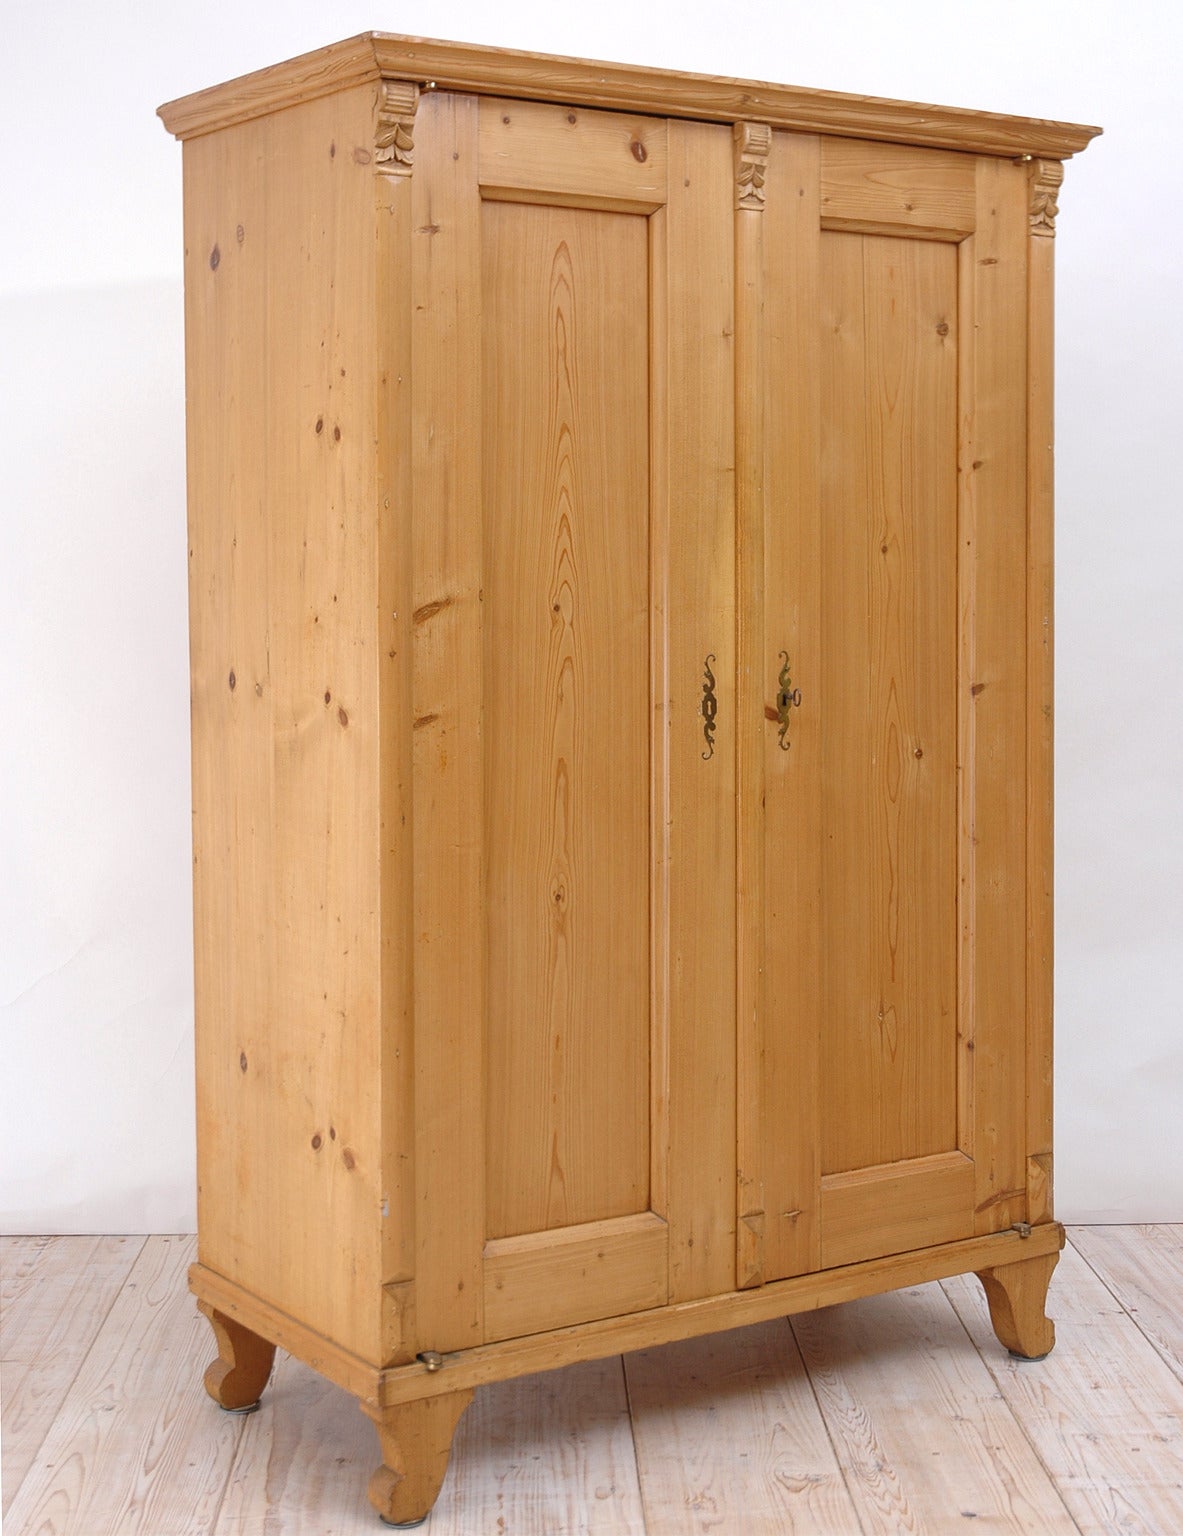 From the Austria-Hungarian Empire, a beautiful small armoire in pine with two doors opening to an interior outfitted with fixed and adjustable shelving and one small drawer. Knife hinges were added to allow the doors to open 180 degrees (flush with